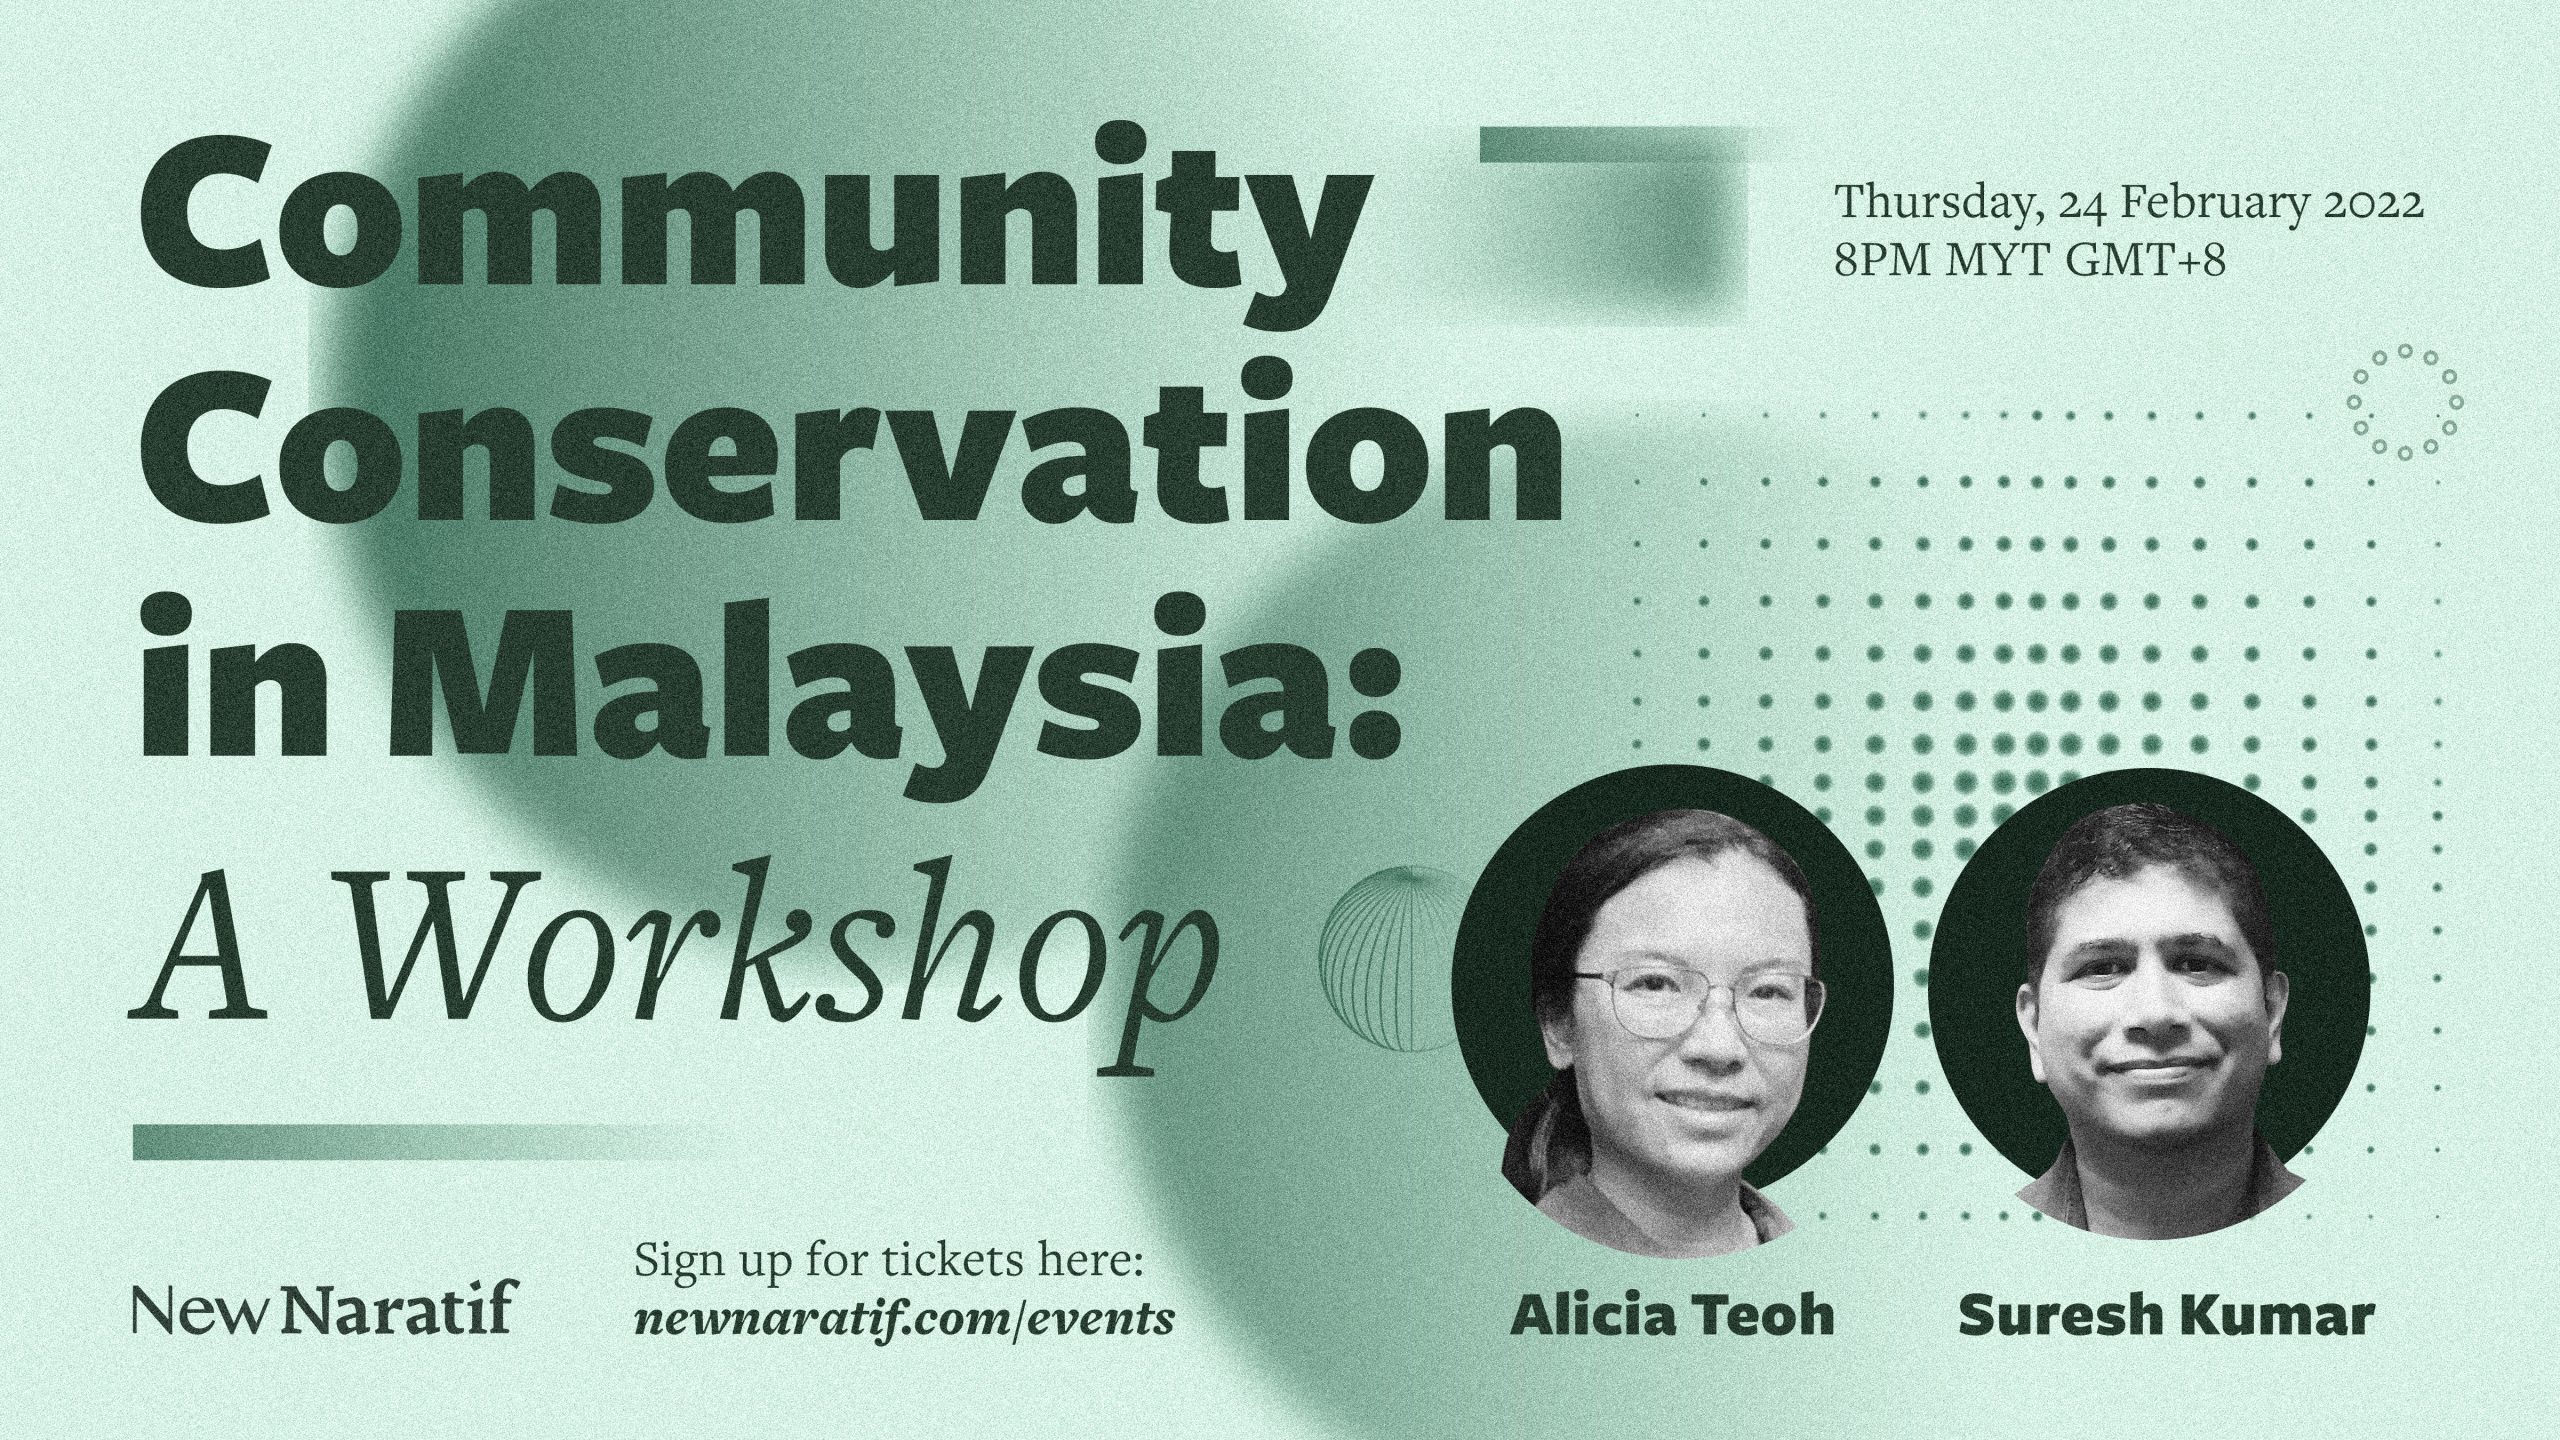 A banner that advertises a Community Conservation in Malaysia event. The event is a workshop and will take place on 24 February at 8 p.m. GMT +8. It features the pictures of Alicia Teoh and Suresh Kumar